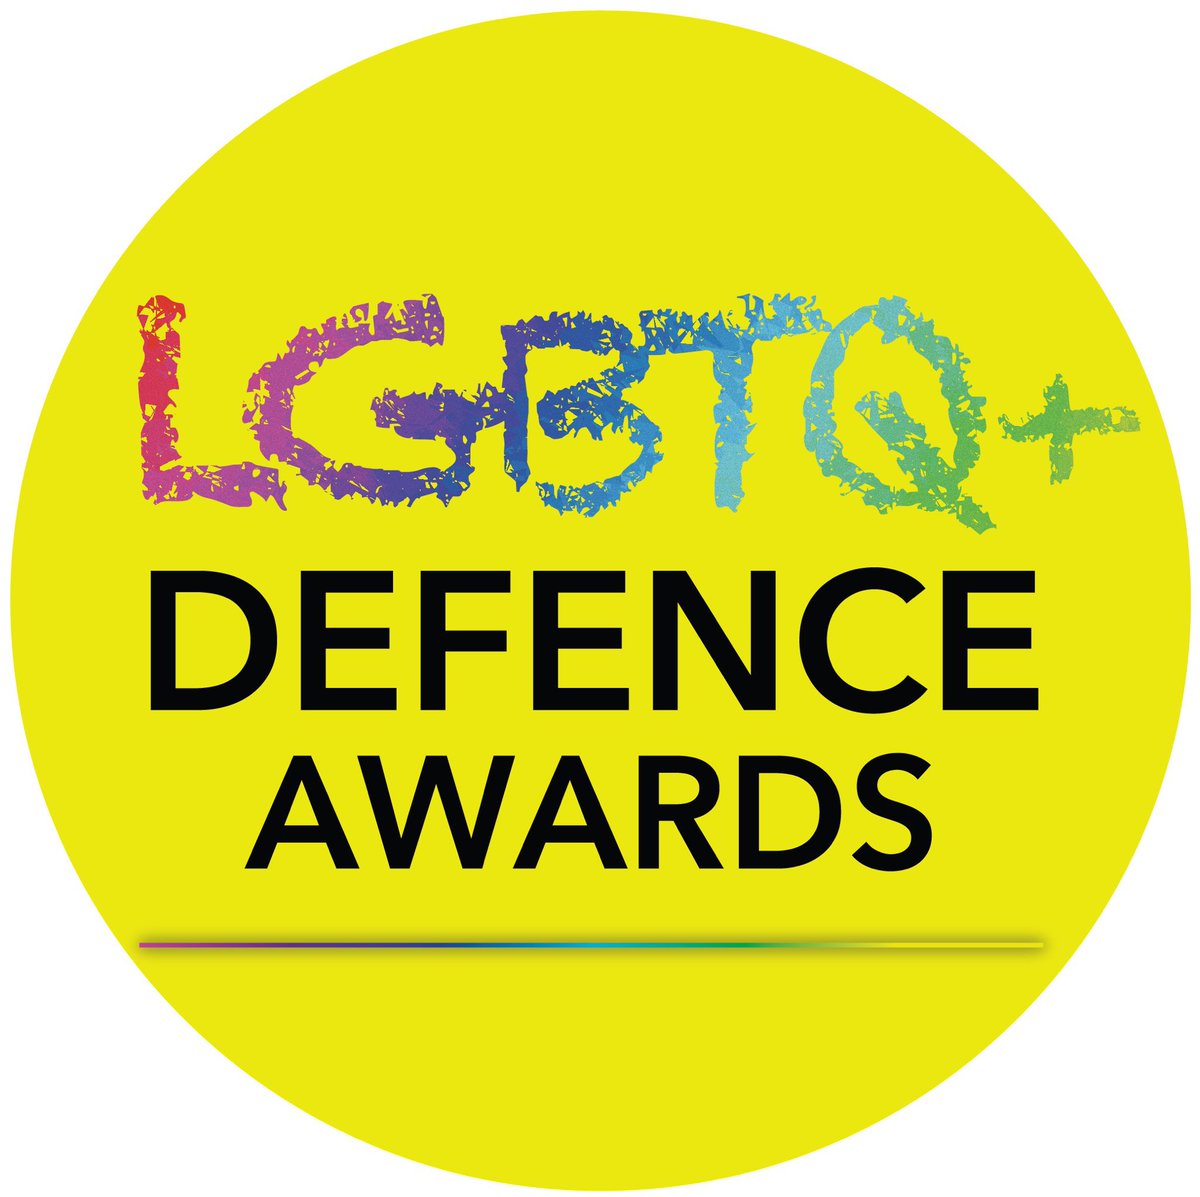 Good luck to all the nominees at tonight’s @defencelgbtq Awards! Fantastic to see the hard work of LGBTQ+ individuals and our Allies within the wider Defence Industry.